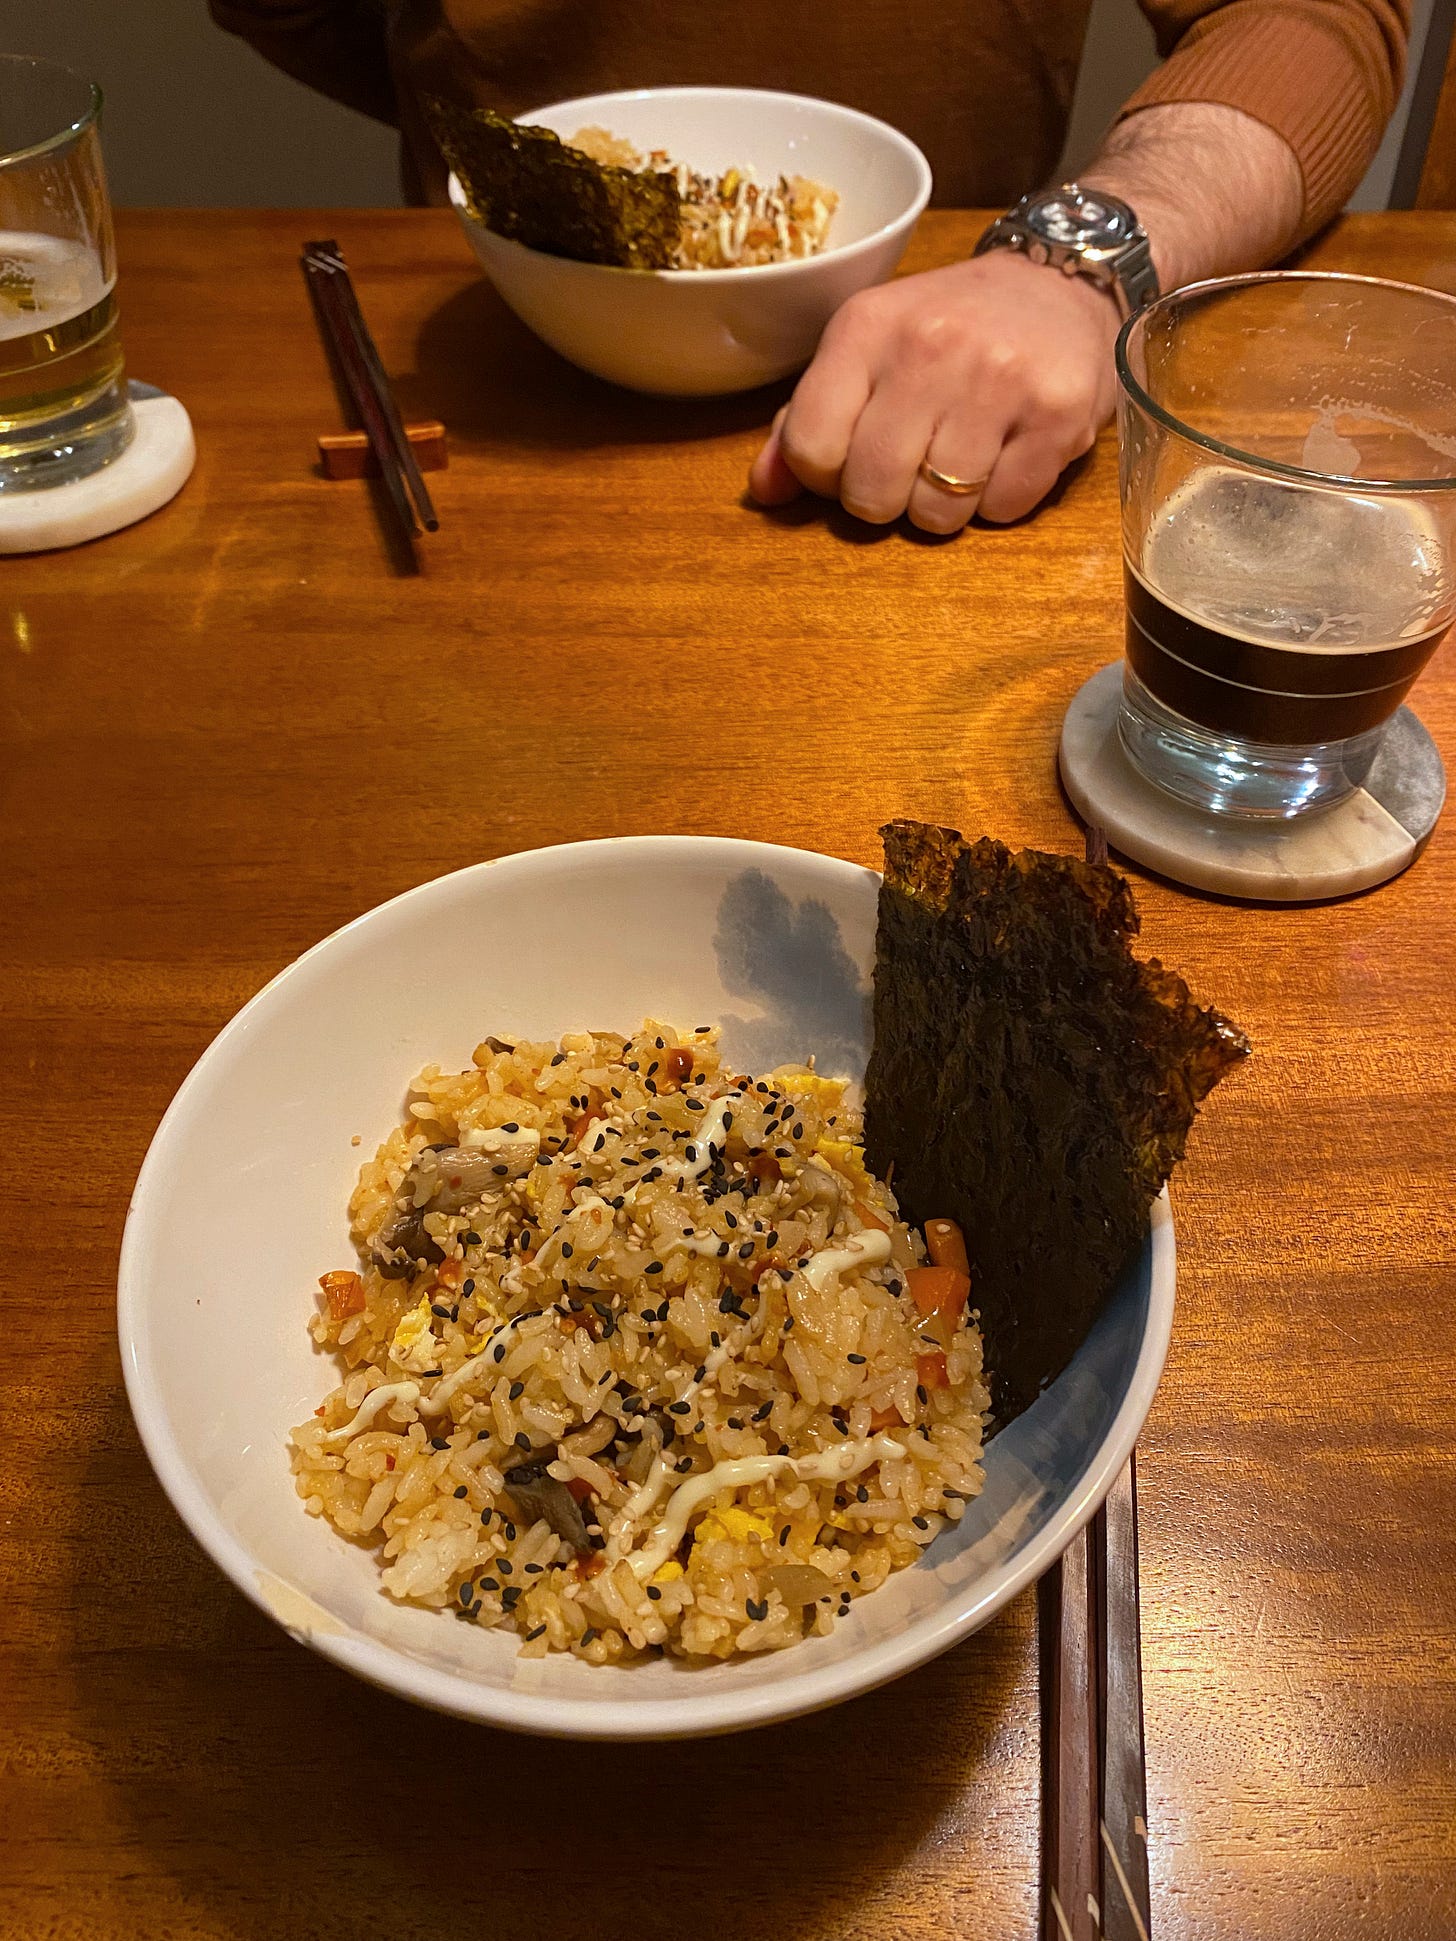 Across from each other on the table are two bowls of fried rice, each with pieces of gim at the side and a light drizzle of kewpie mayo and sriracha over top. Next to each plate is a set of chopsticks, and a half-full glass of beer on a stone coaster.